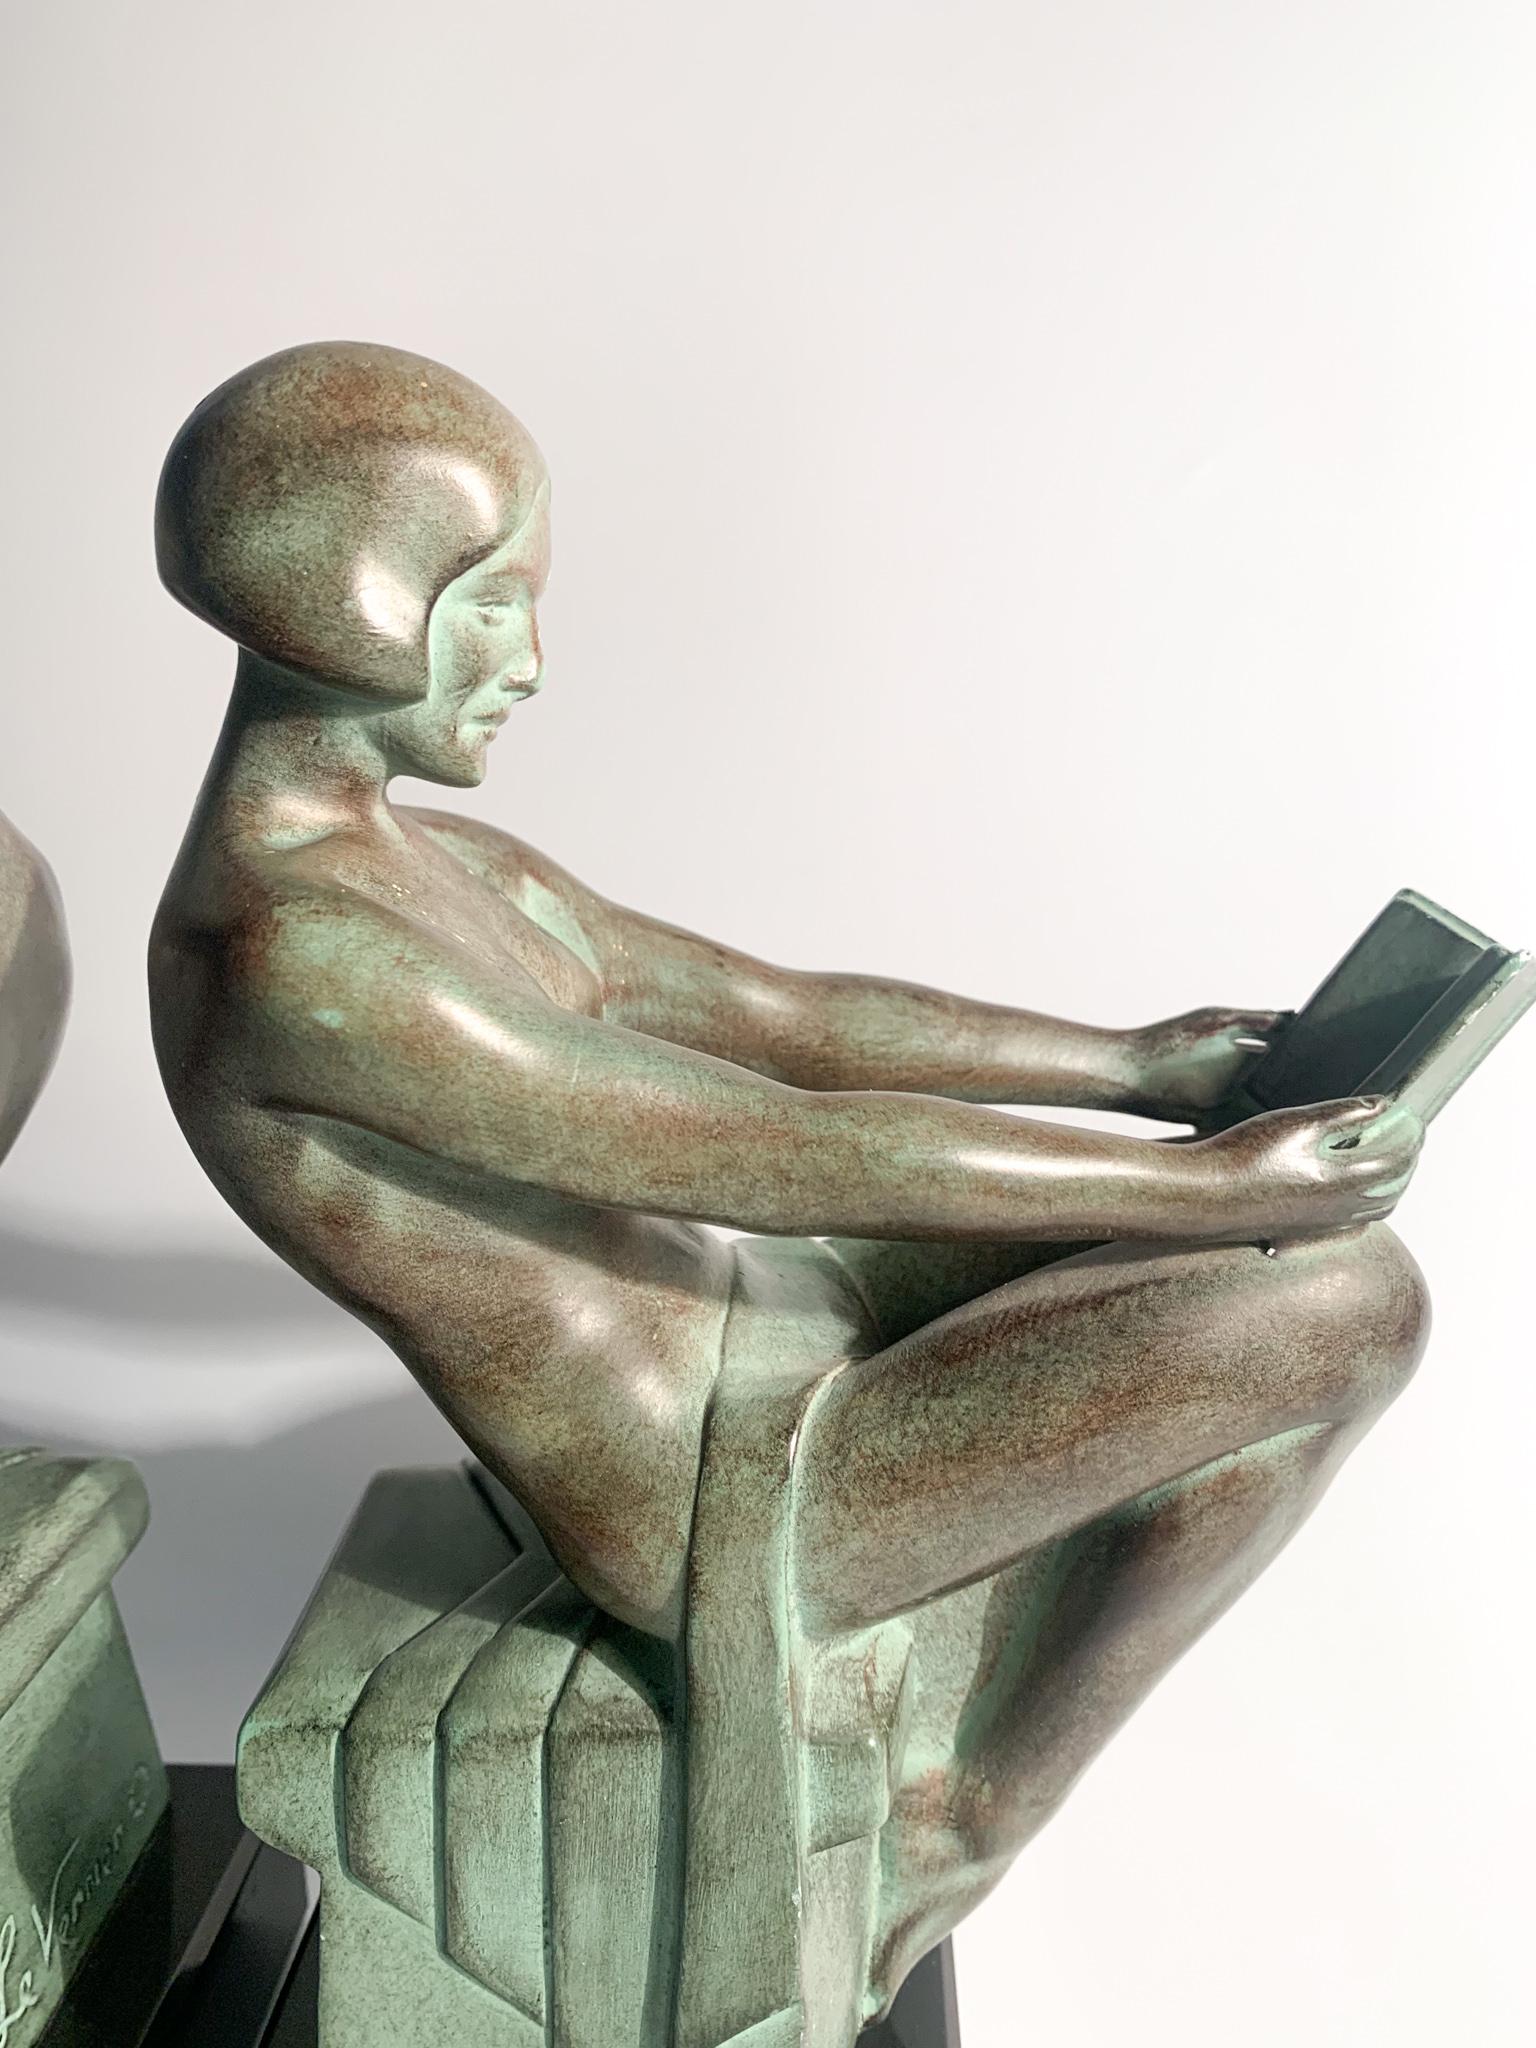 French Pair Art Deco Bookends in Artistic Metal by Max Le Verrier from the 1930s